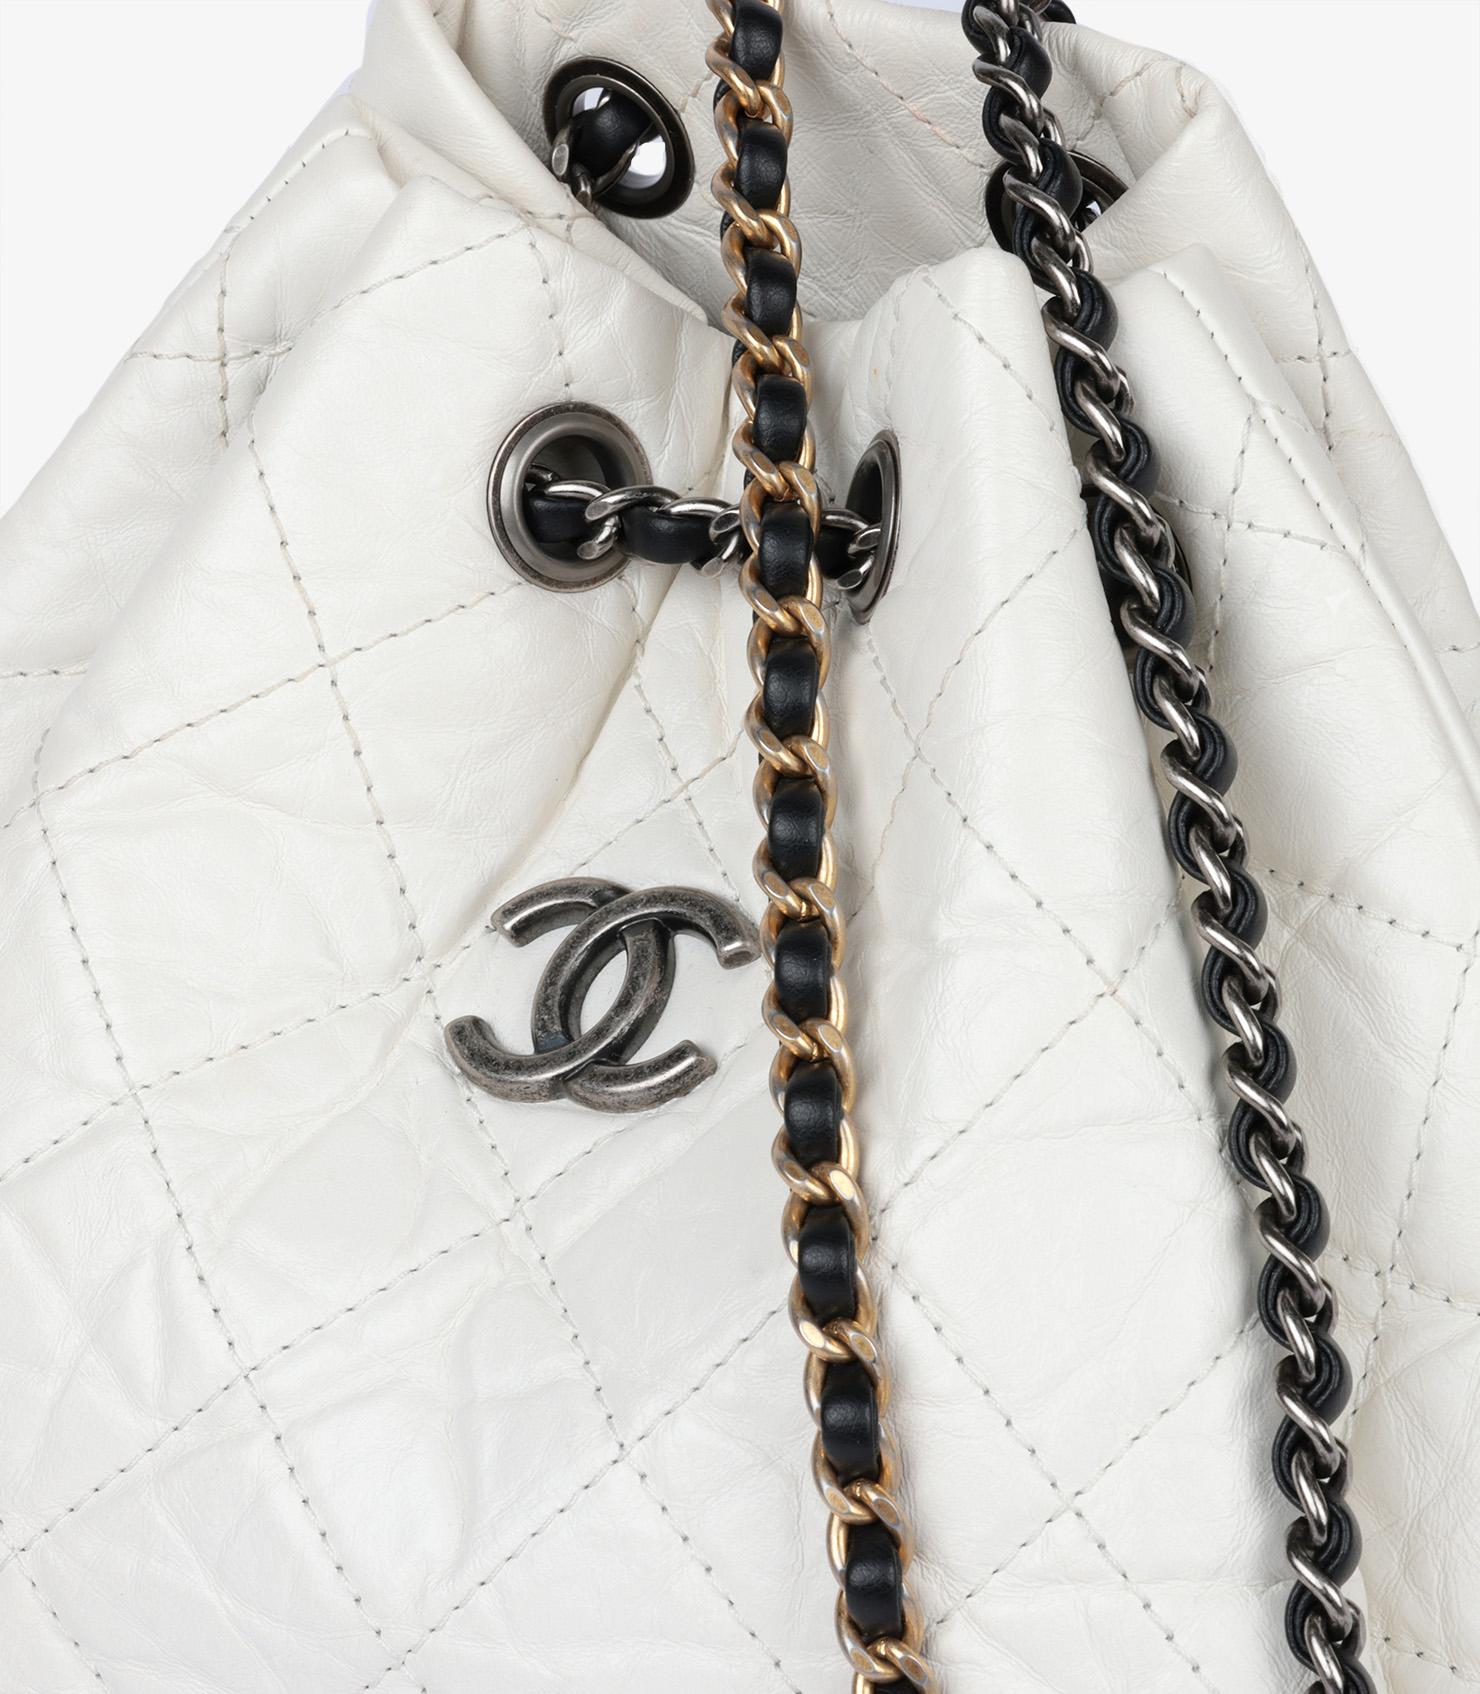 Chanel Black & White Calfskin Leather Gabrielle Backpack  For Sale 4